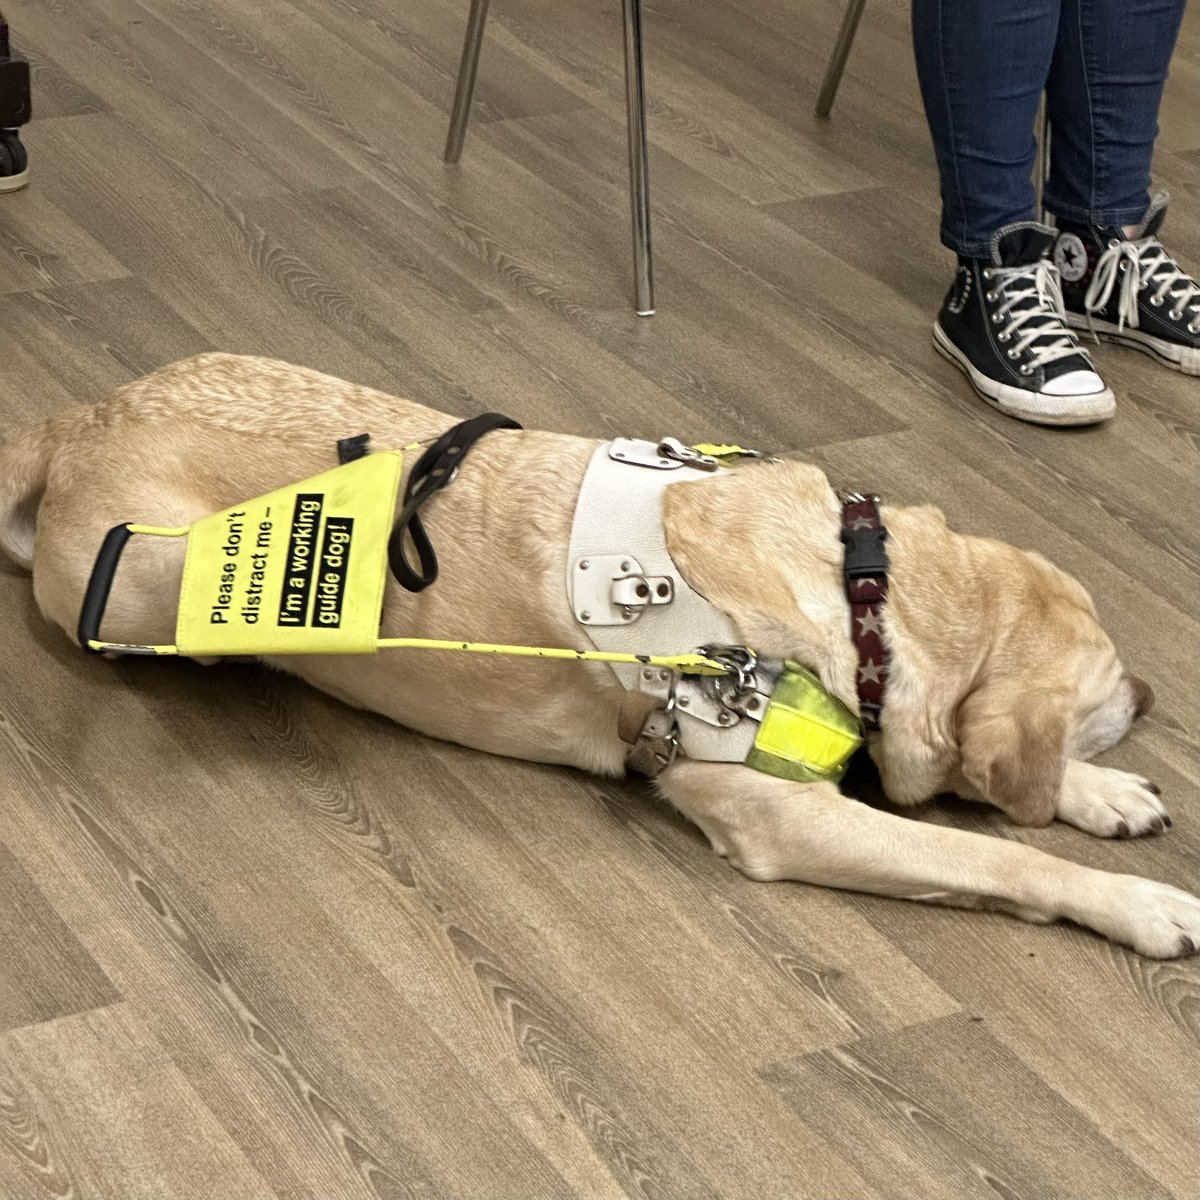 Great talk on understanding sight loss & training guide dogs, by 2 ambassadors from Guide Dogs, our member Dr Jane Manley, joining her Dr Anica Zeyen, Royal Holloway Uni  & their guide dogs Rosie and Lassie  #horleyeveningwi #surreyfedwi #thewomensinstitute #guidedogsfortheblind